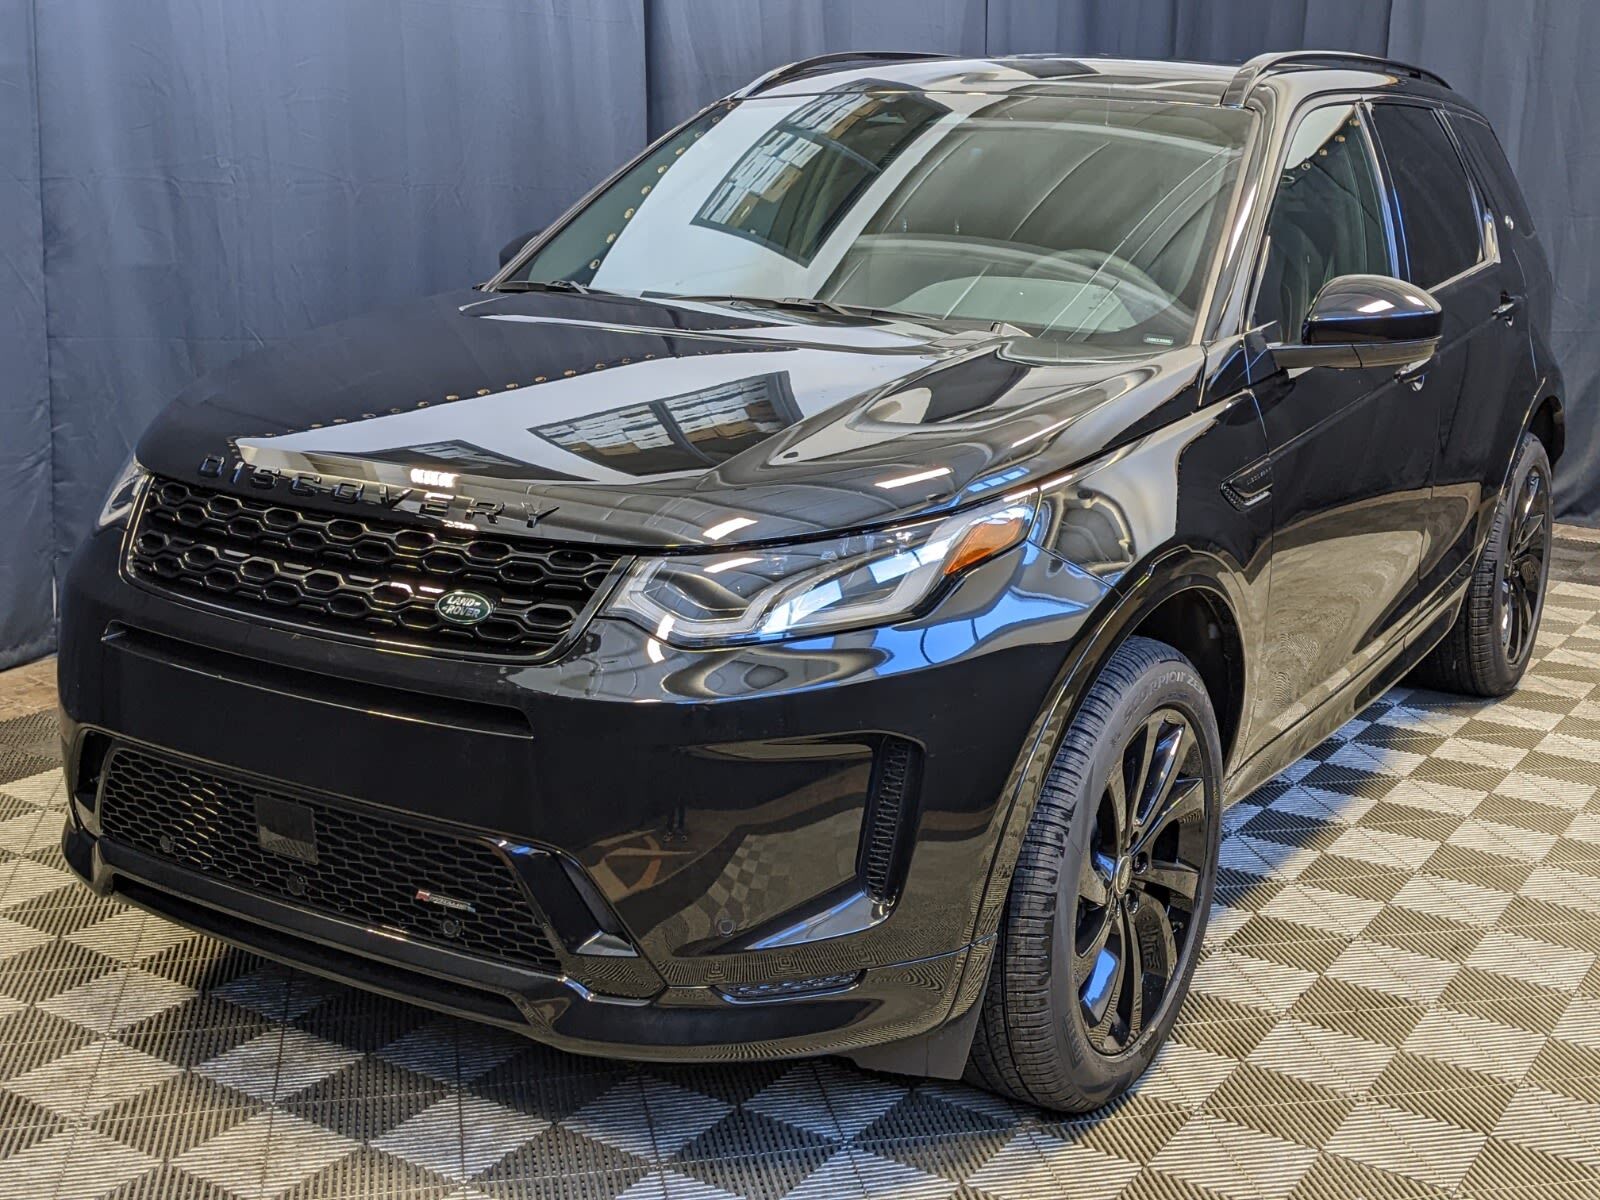 2023 Land Rover Discovery Sport $14,432 IN DEMO SAVINGS! HSE MODEL